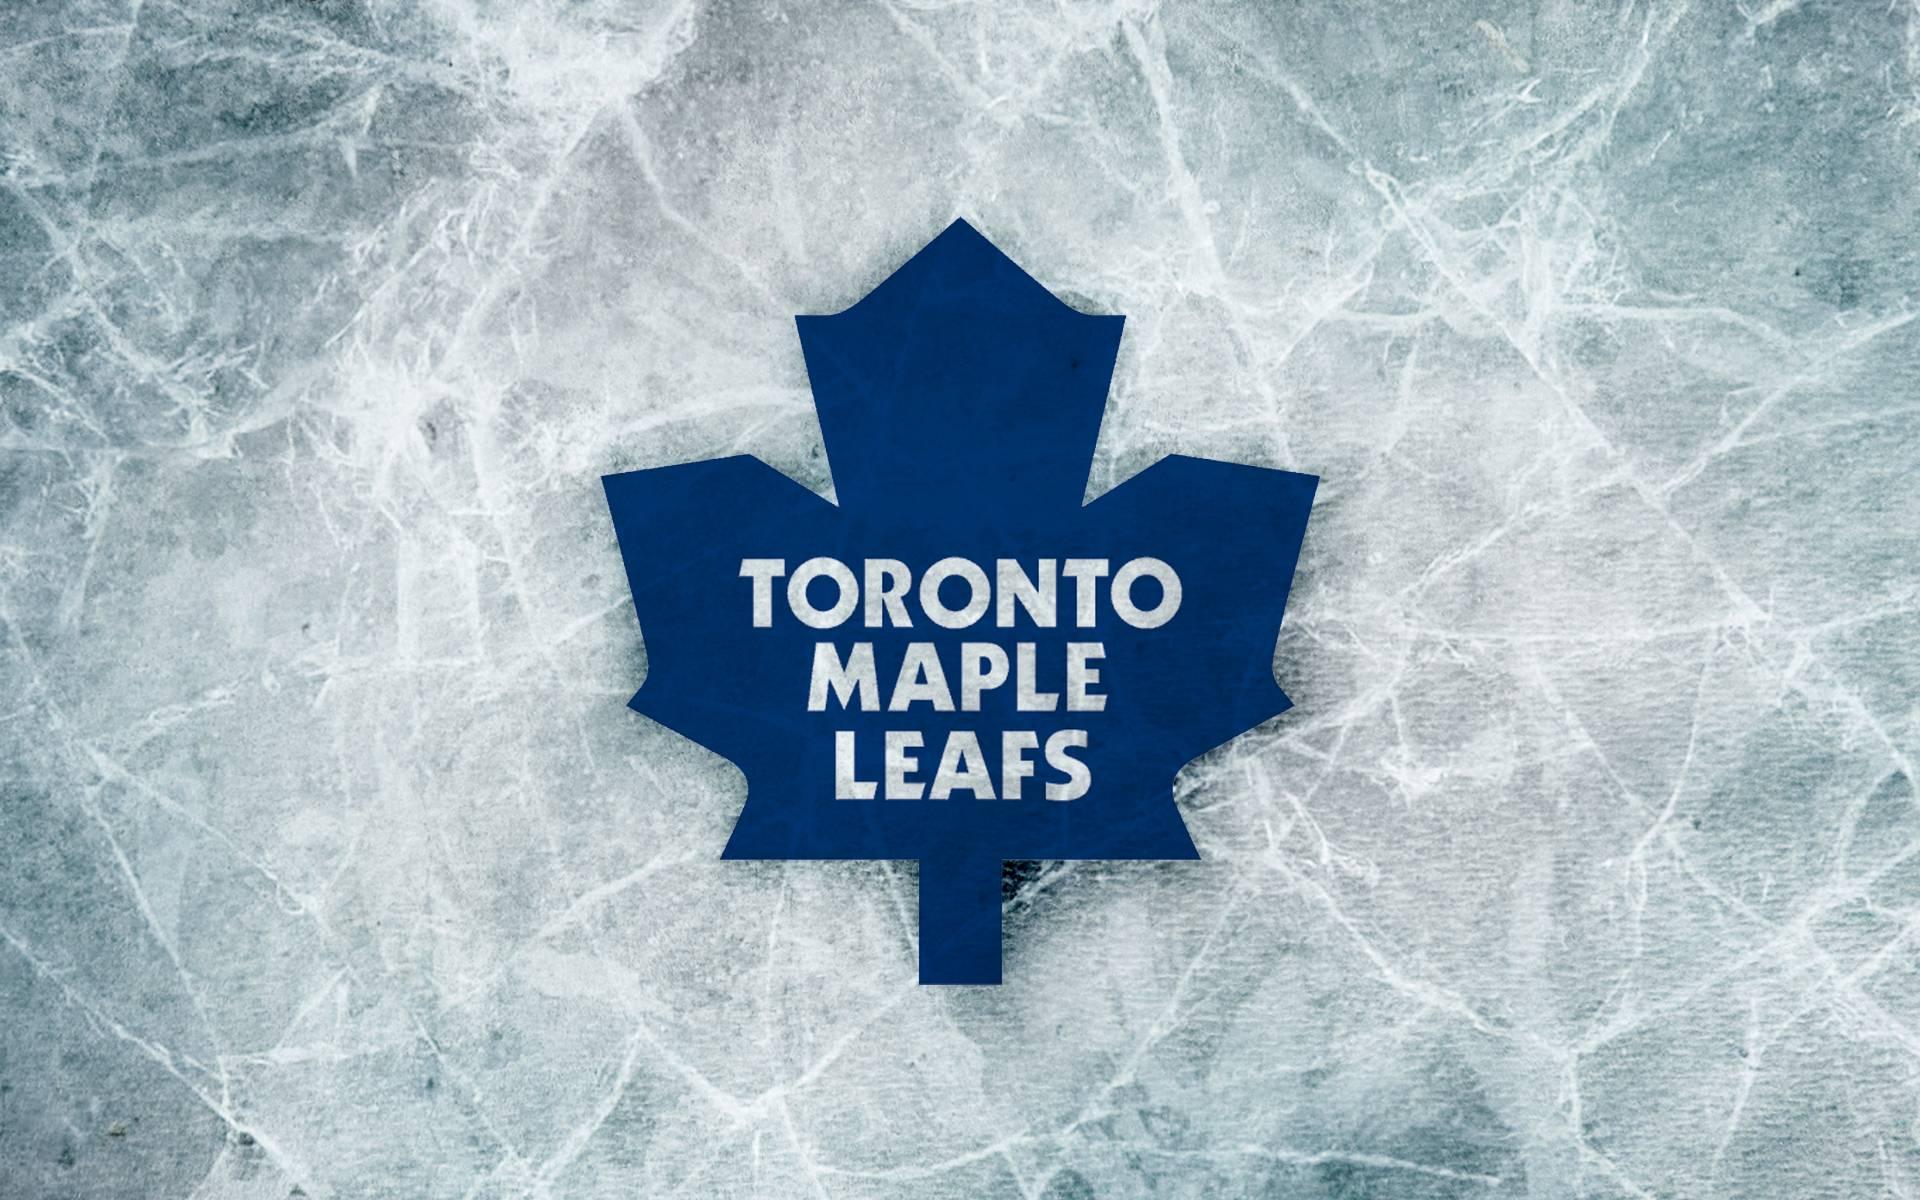 Toronto Maple Leafs Wallpaper Background Image